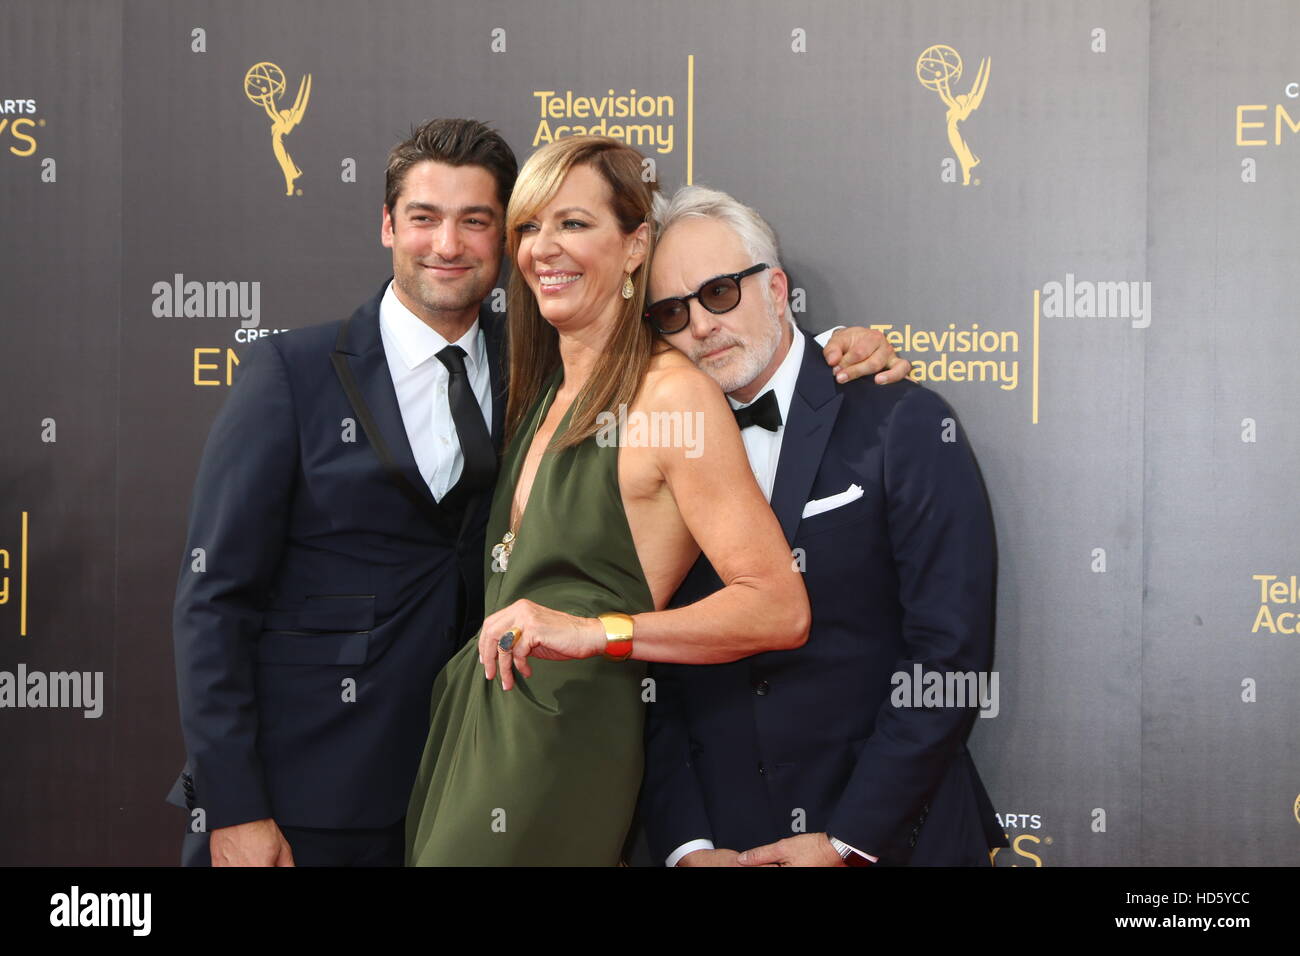 2016 Creative Arts Emmy Awards - Day 1 - Arrivals at the Microsoft Theater on September 10, 2016 in Los Angeles, CA  Featuring: Philip Joncas, Allison Janney, Bradley Whitford Where: Los Angeles, California, United States When: 10 Sep 2016 Stock Photo